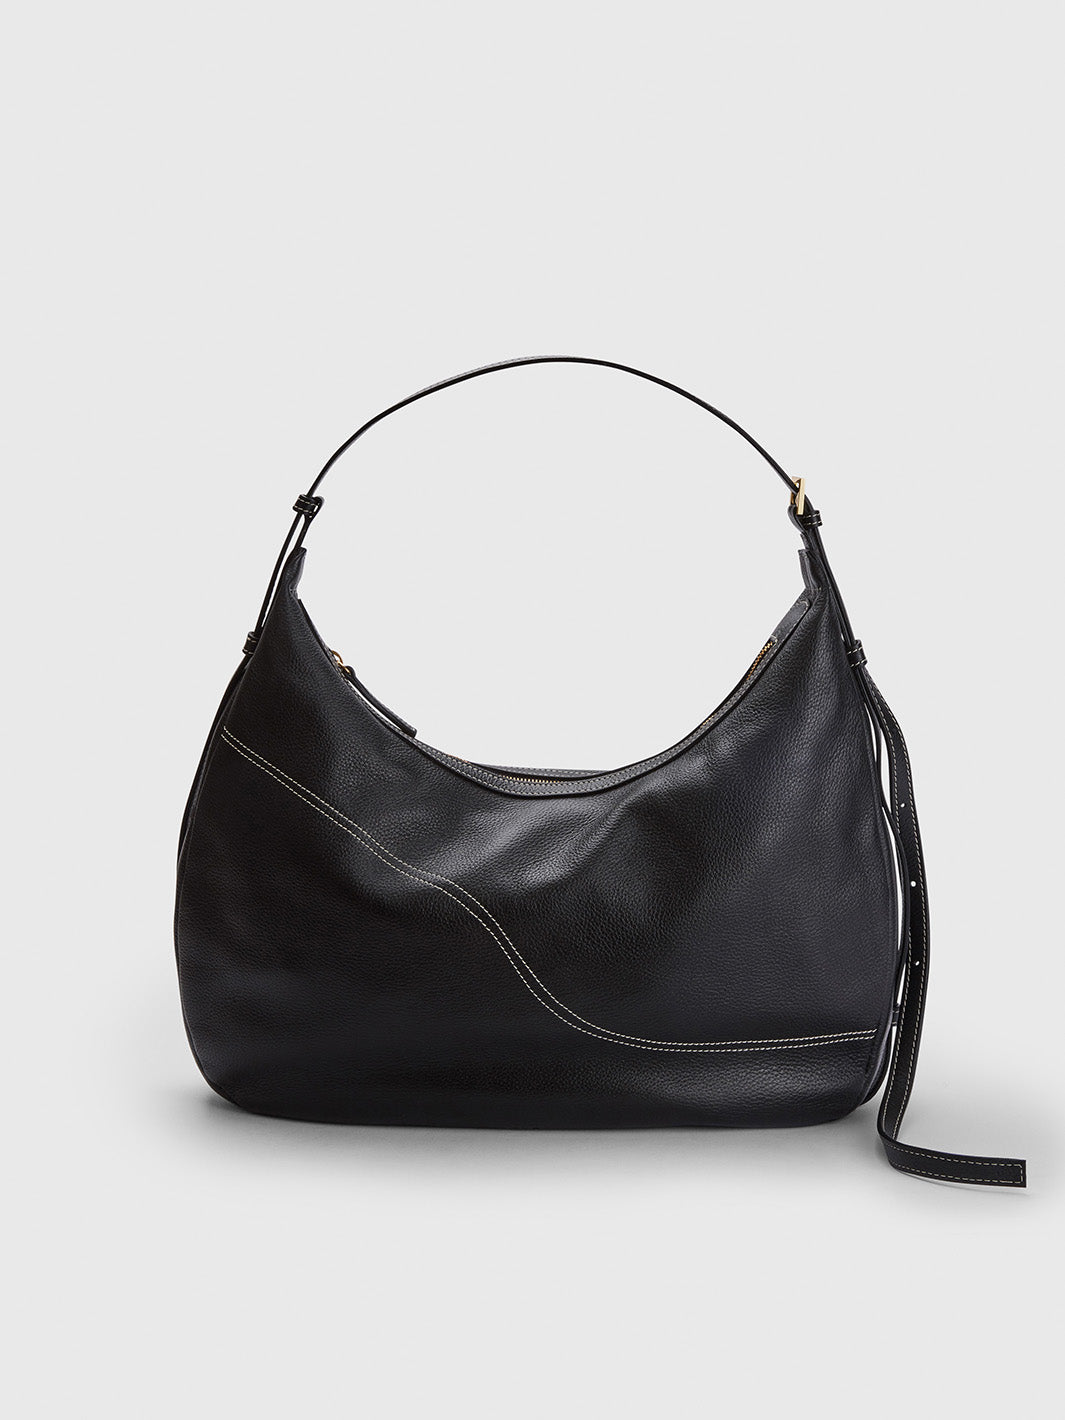 Potenza Black/Contrast Stitch Grained leather Large hobo bag